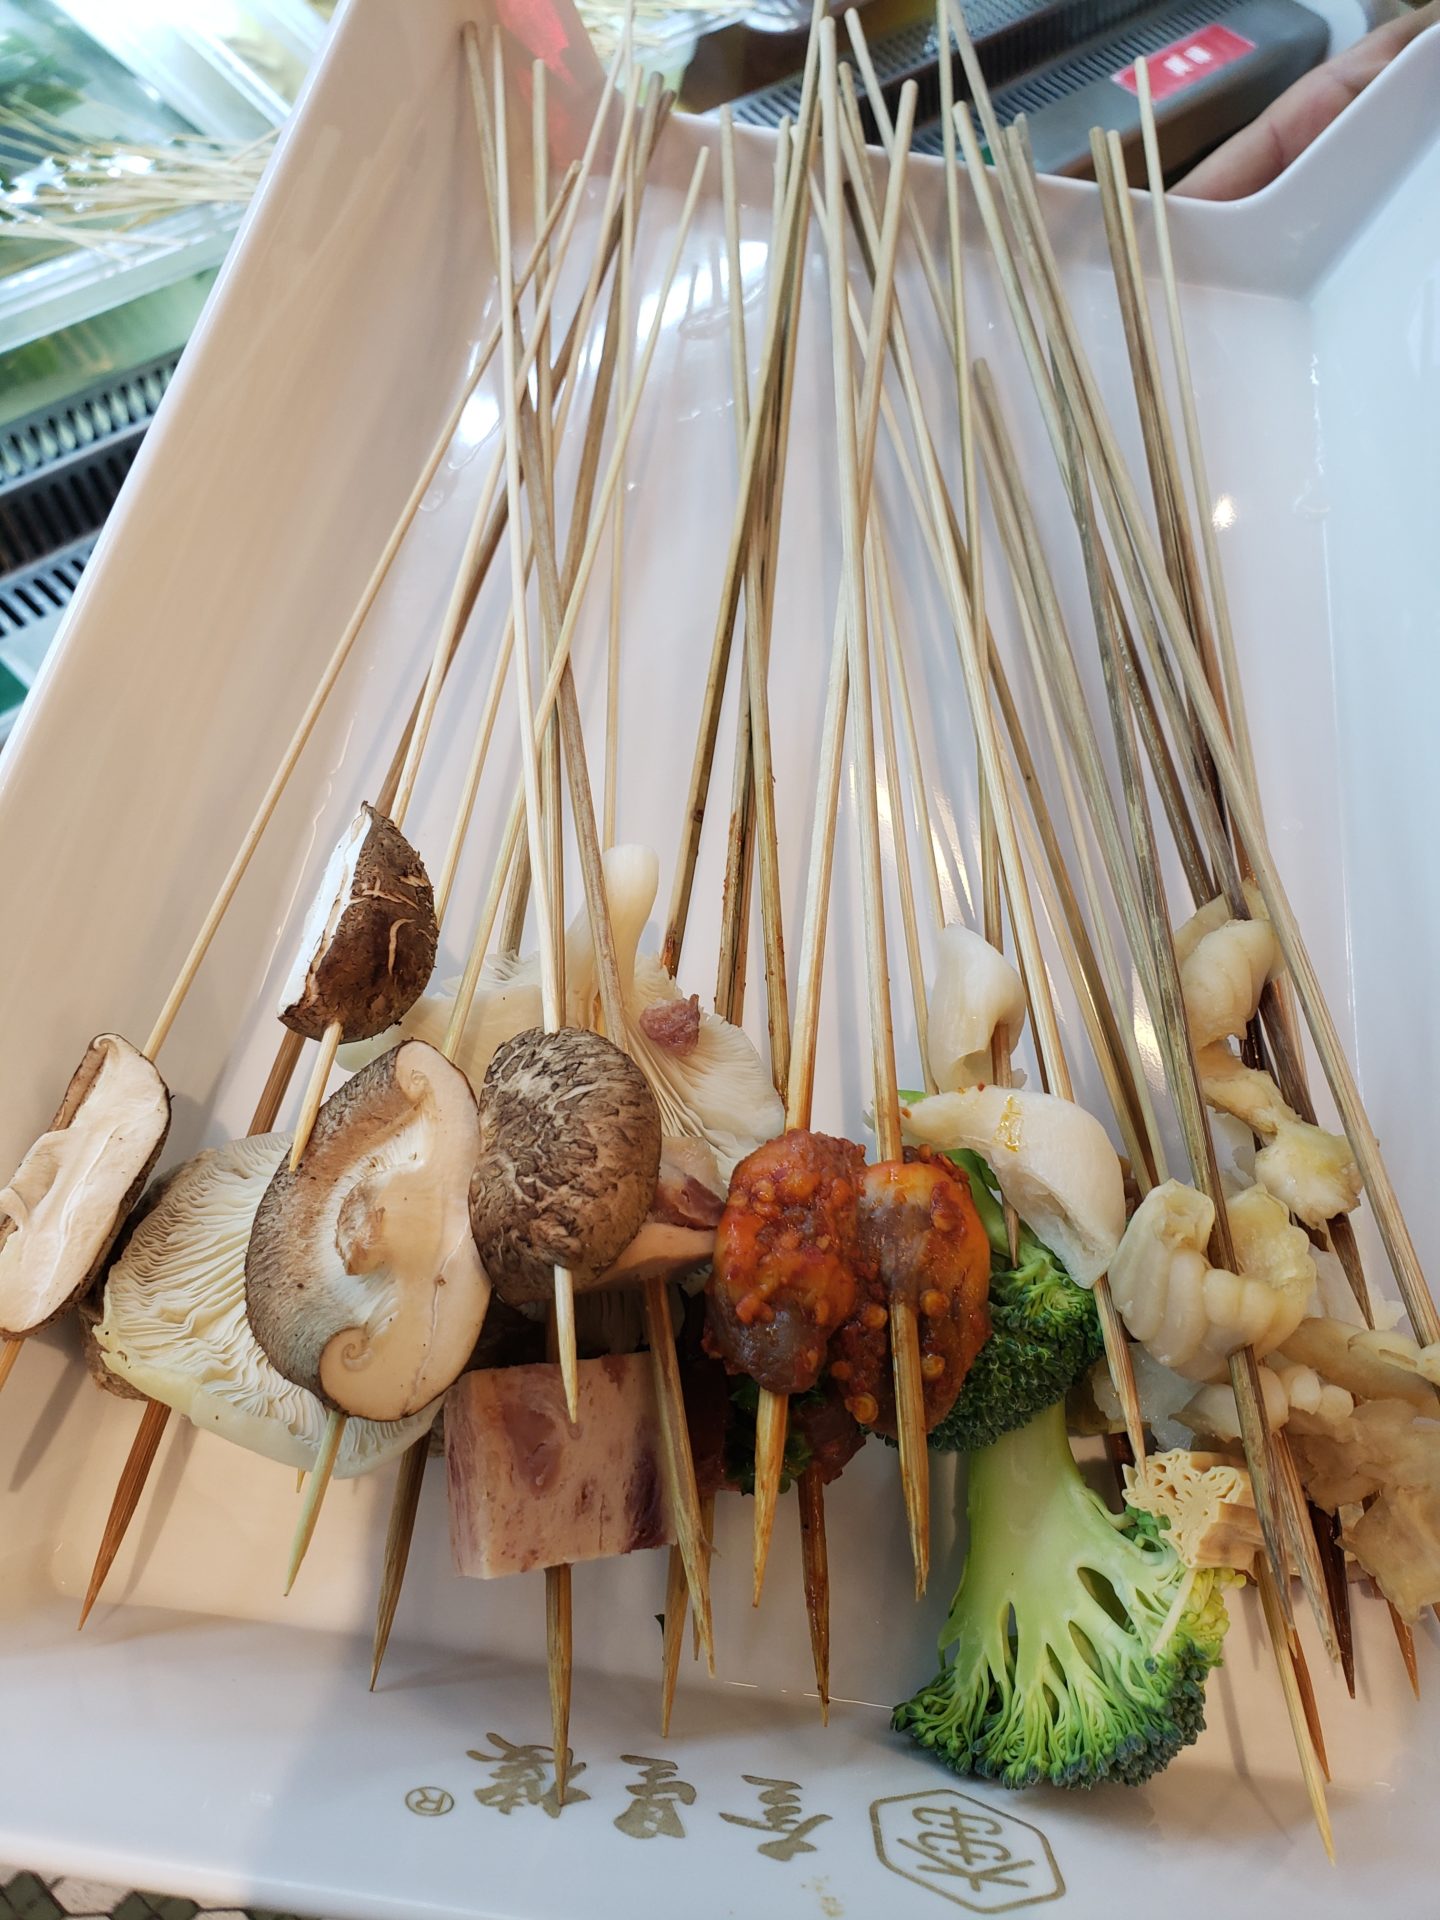 skewers with meat and vegetables on them in a white tray